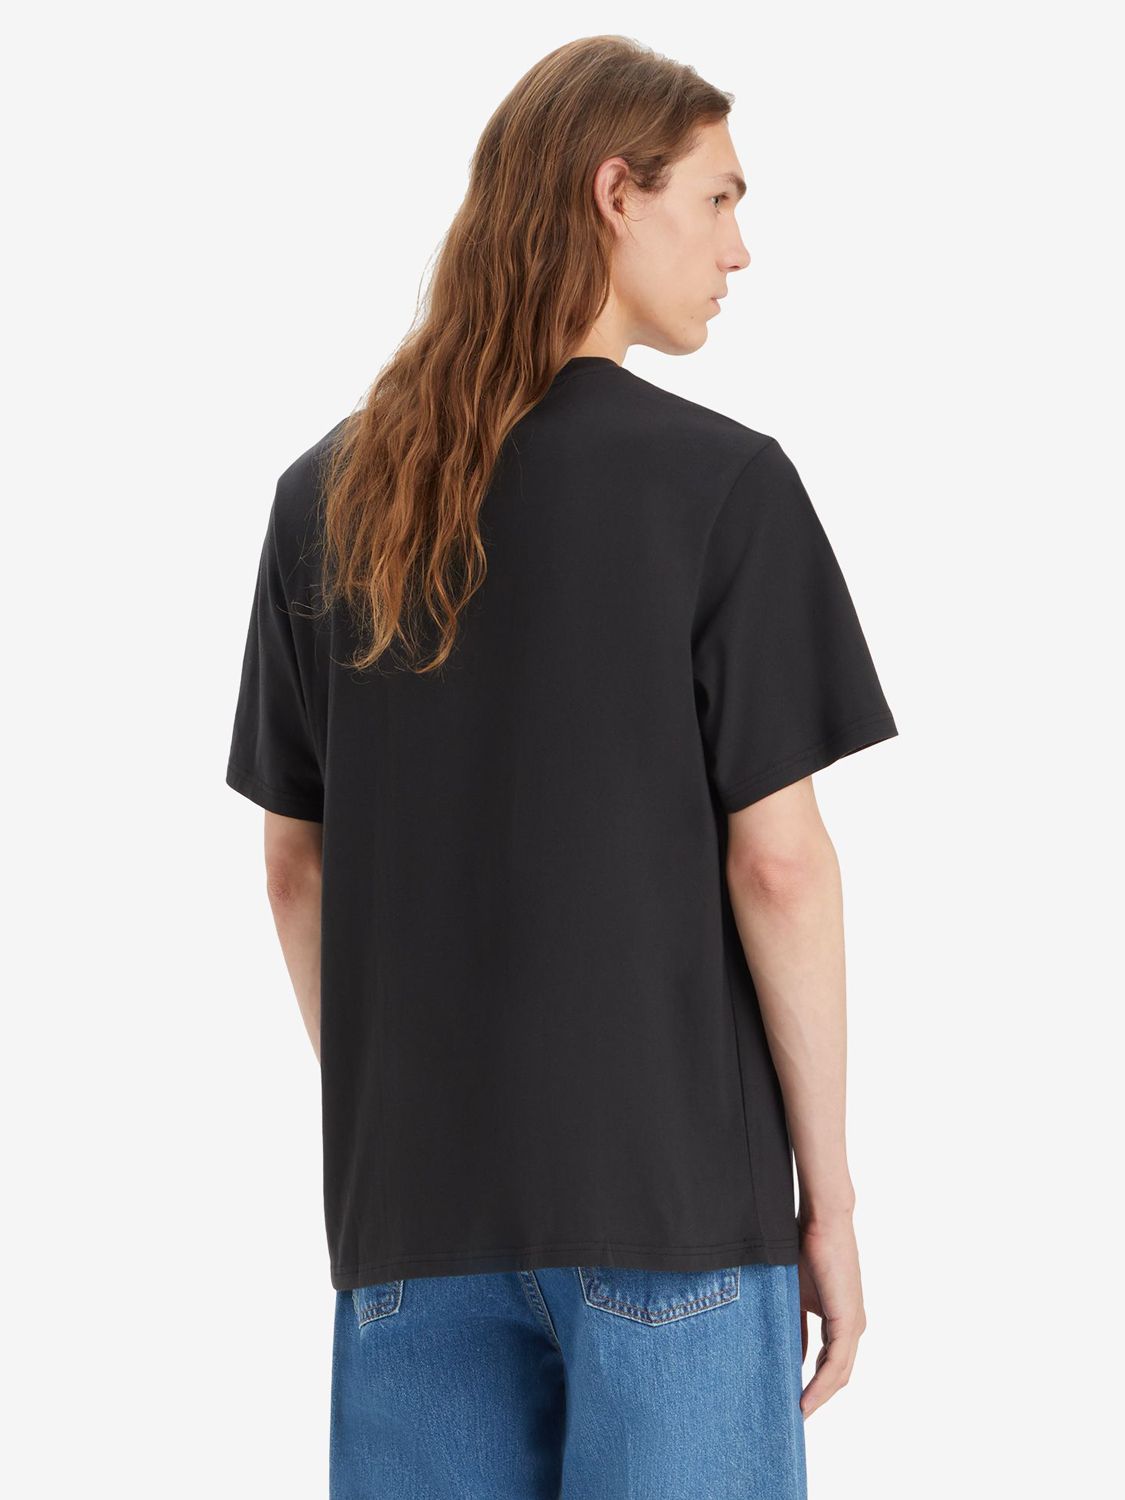 Levi's Short Sleeve Relaxed Fit T-Shirt, Black/Multi, M